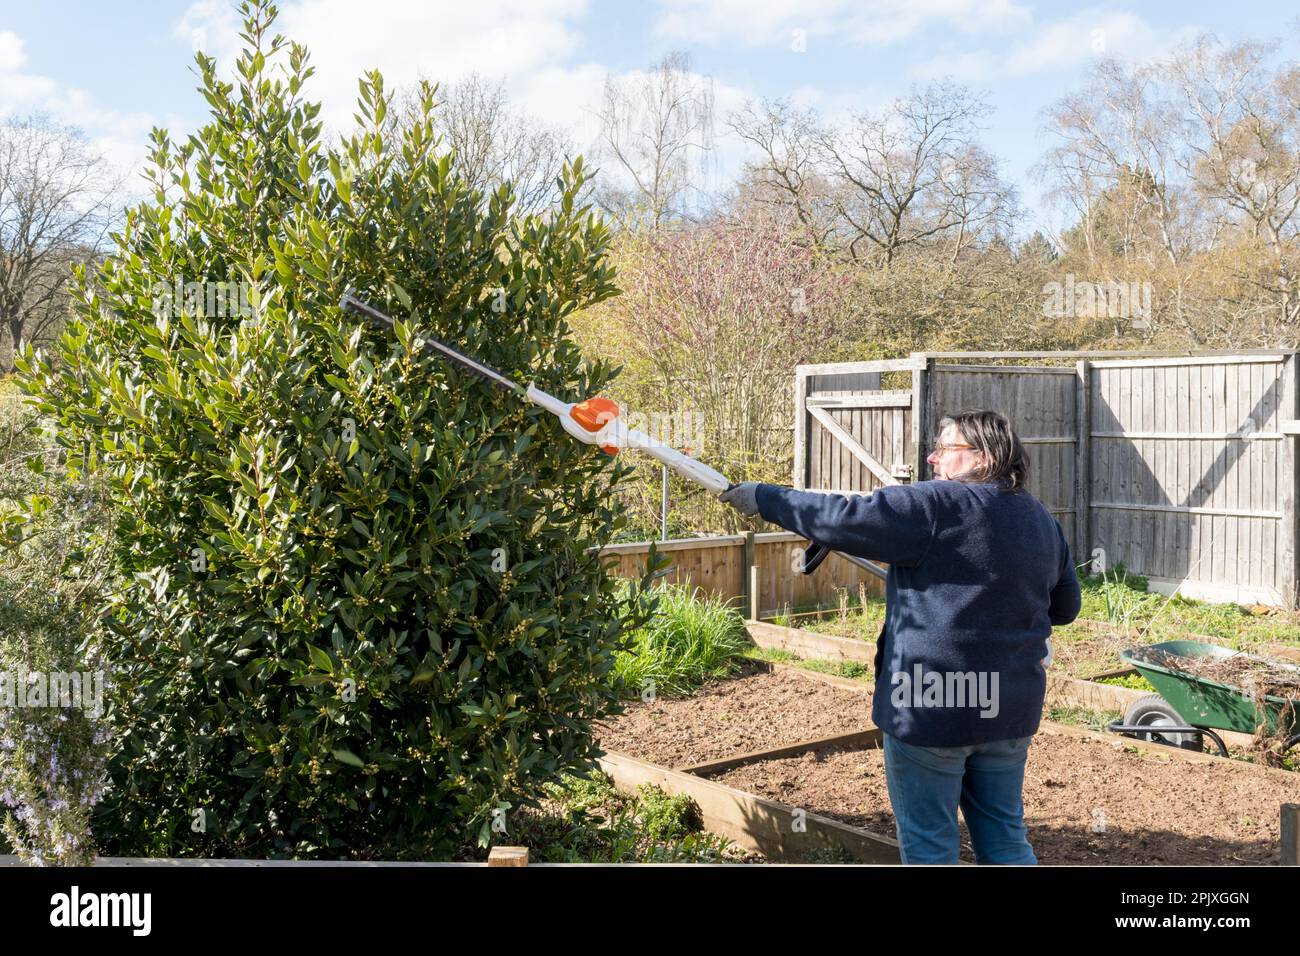 Woman working in the garden, trimming and shaping a laurel bush, Laurus nobilis, with an electric hedge trimmer. Stock Photo